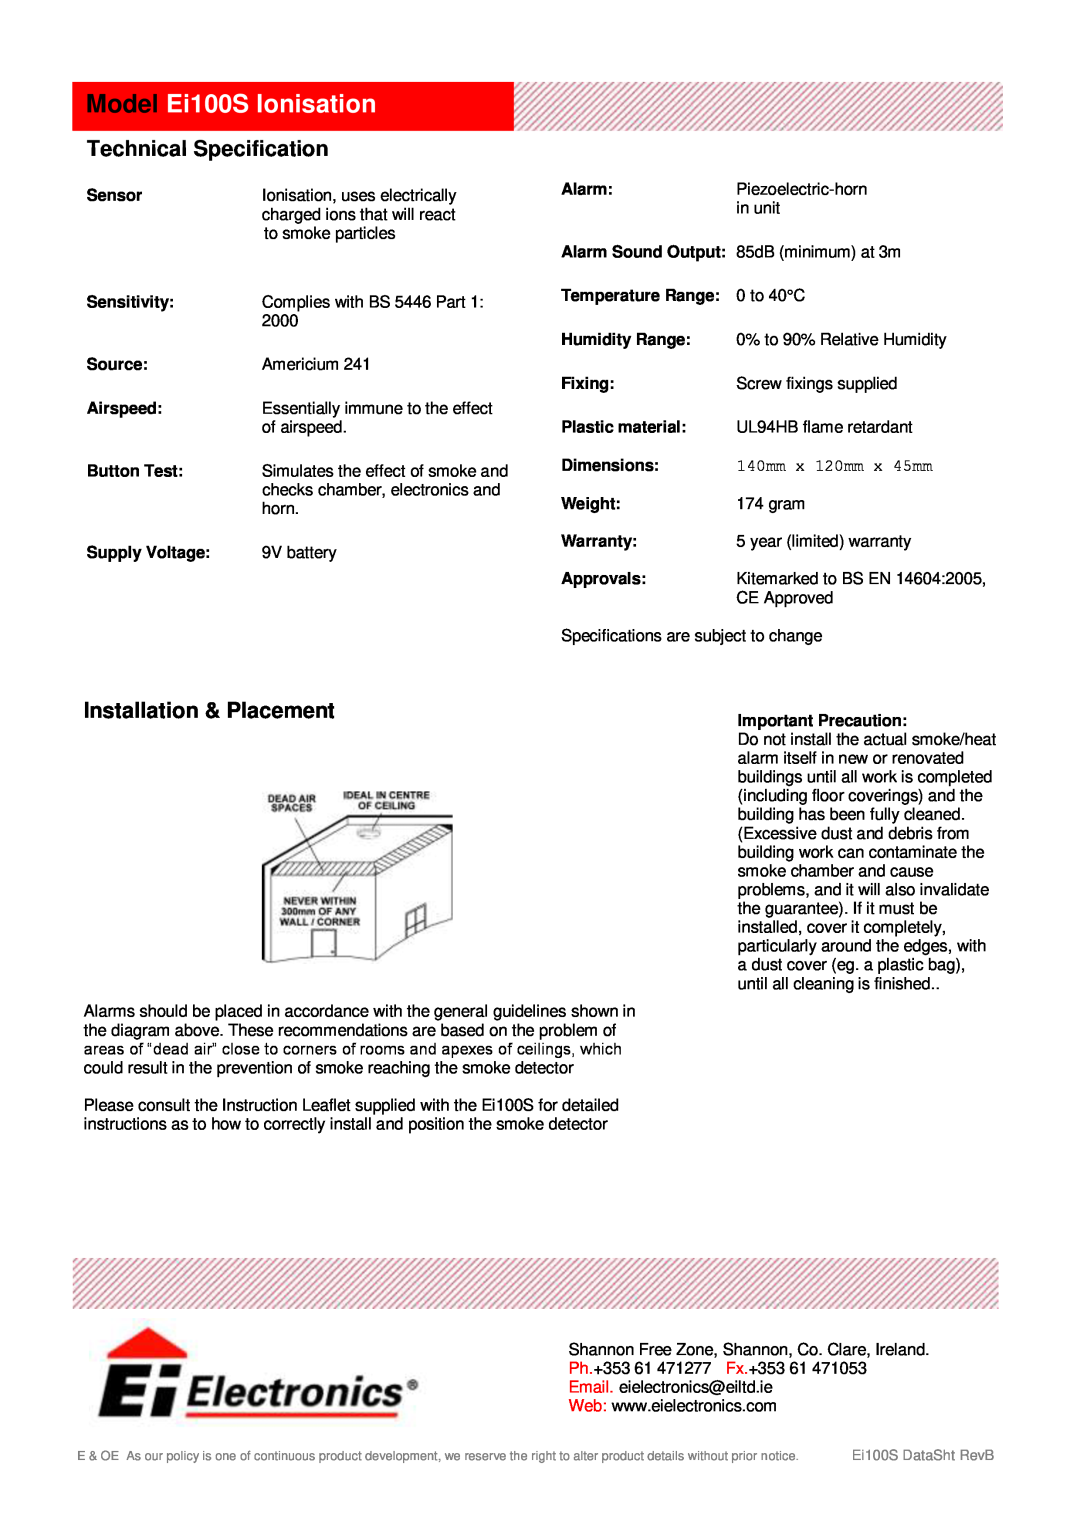 Ei Electronics manual Model Ei100S Ionisation, Technical Specification, Installation & Placement, Source, Supply Voltage 